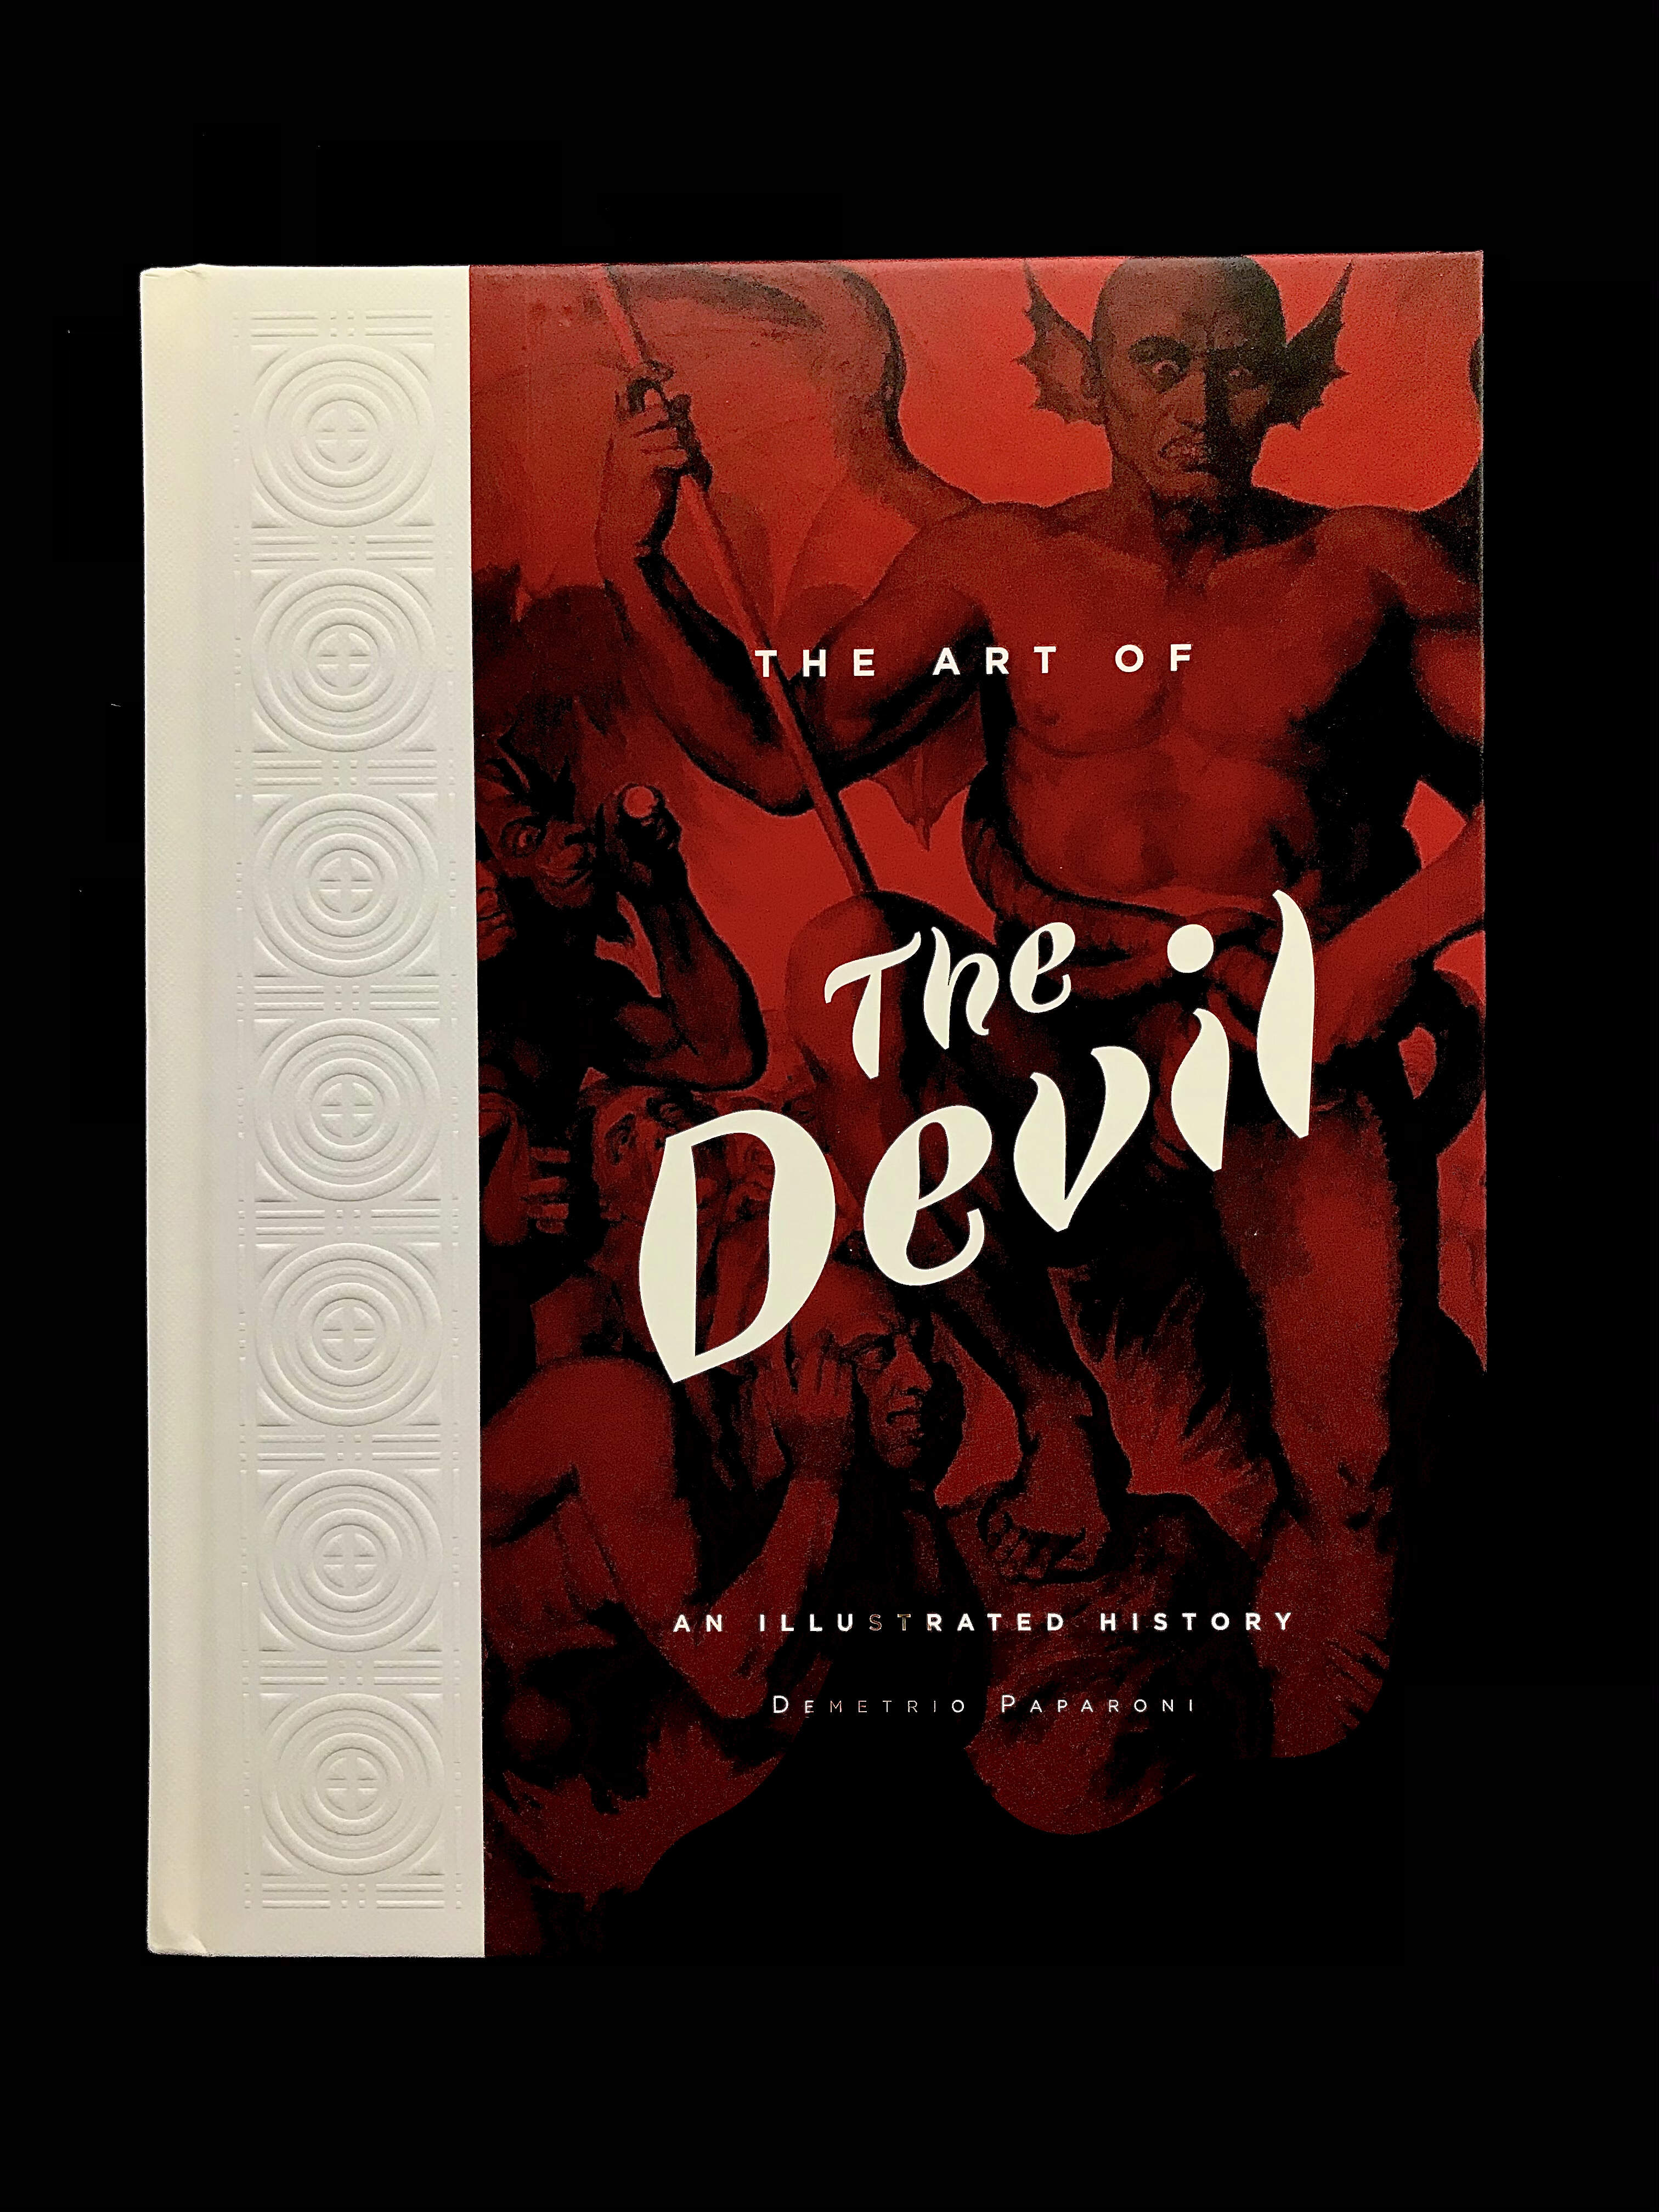 The Art Of The Devil: An Illustrated History by Demetrio Paparoni